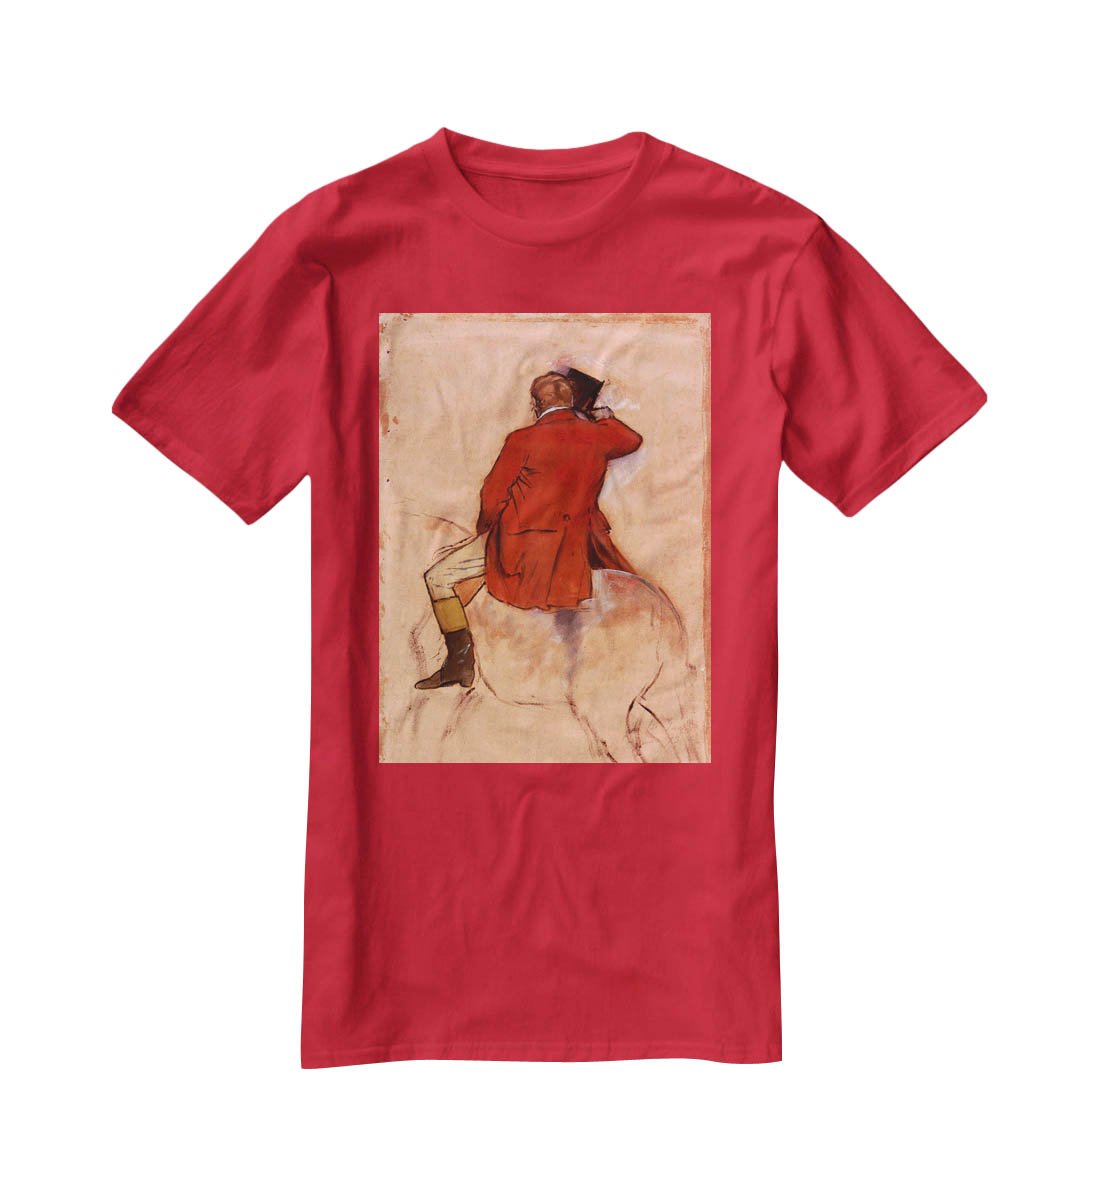 Rider with red jacket by Degas T-Shirt - Canvas Art Rocks - 4